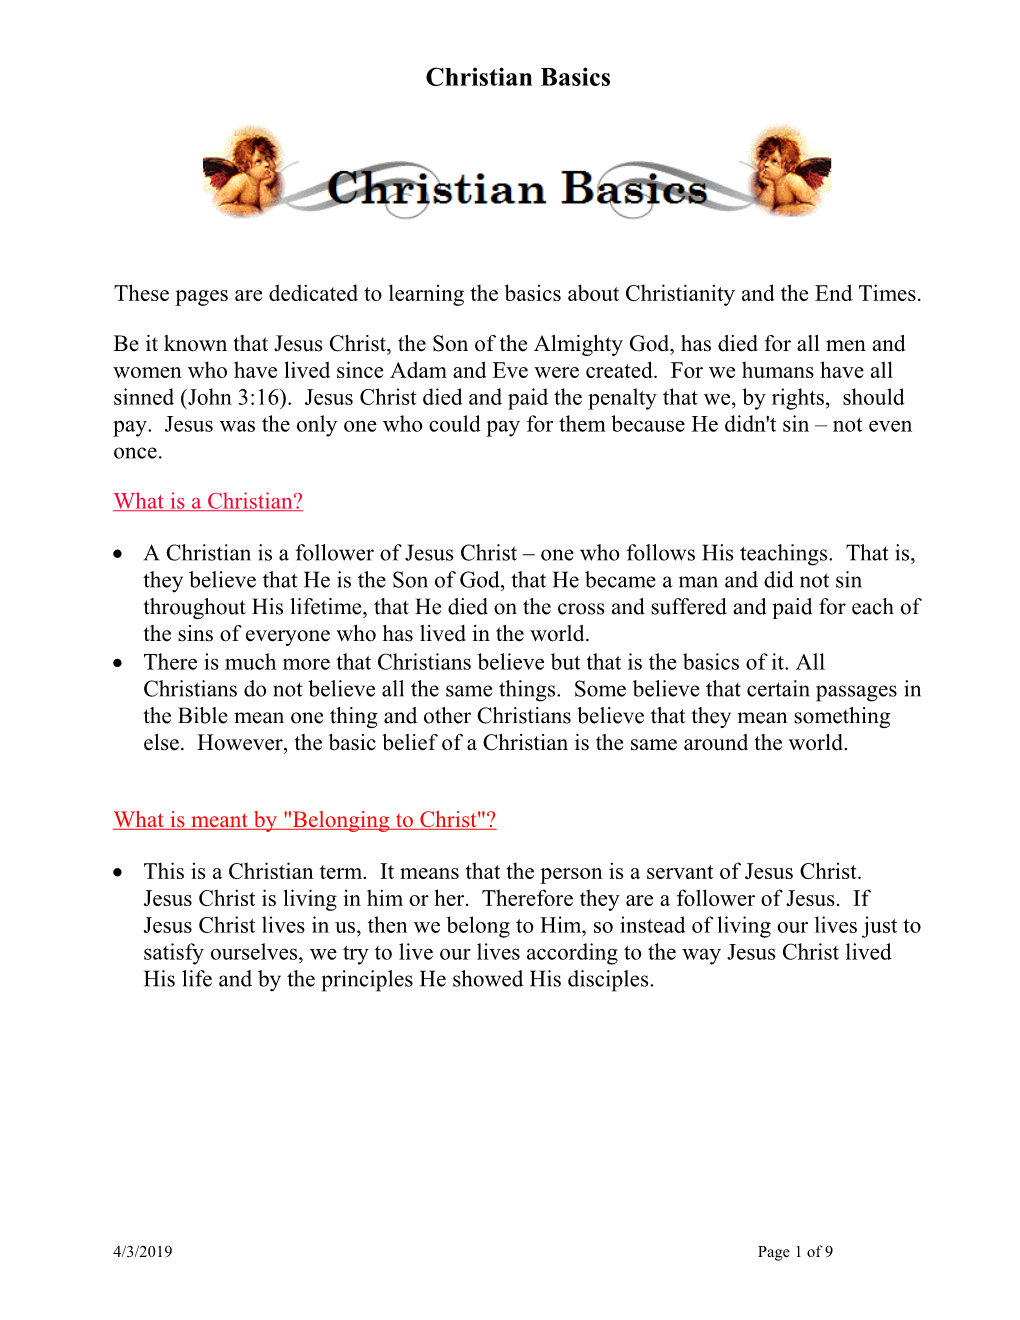 These Pages Are Dedicated to Learning the Basics About Christianity and the End Times